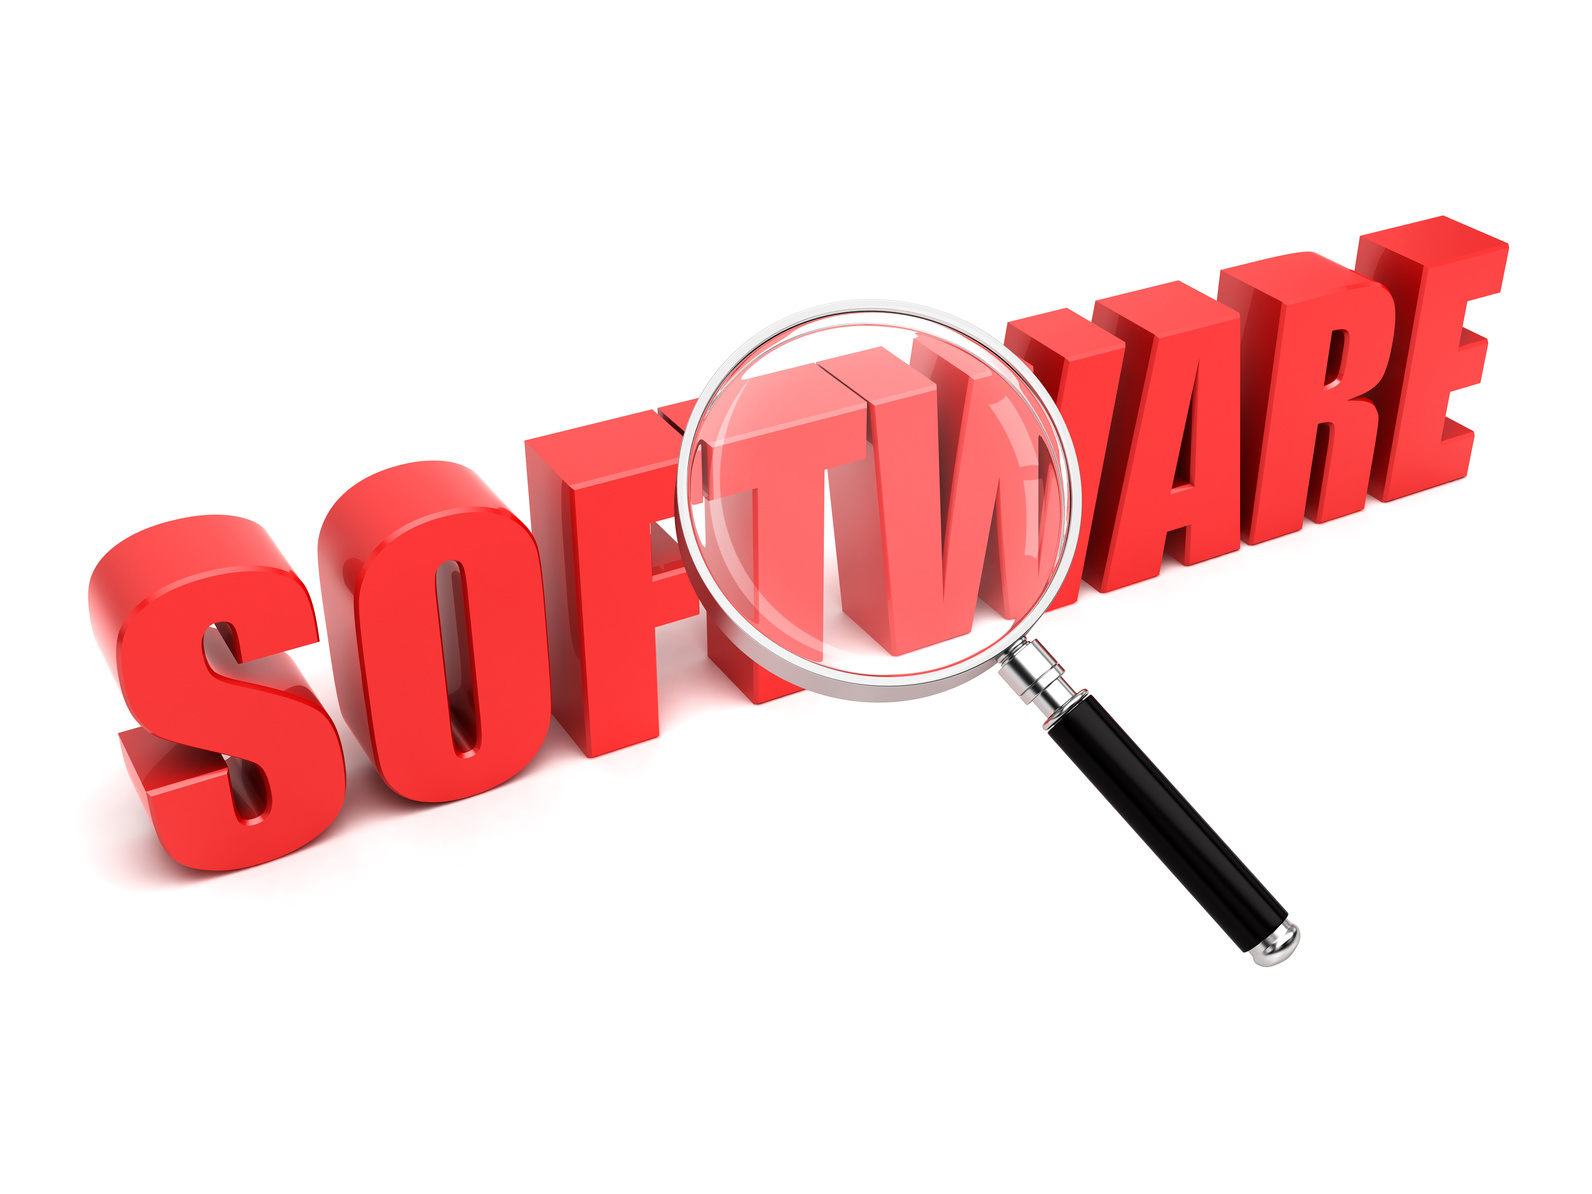 Office Computer Software Programs